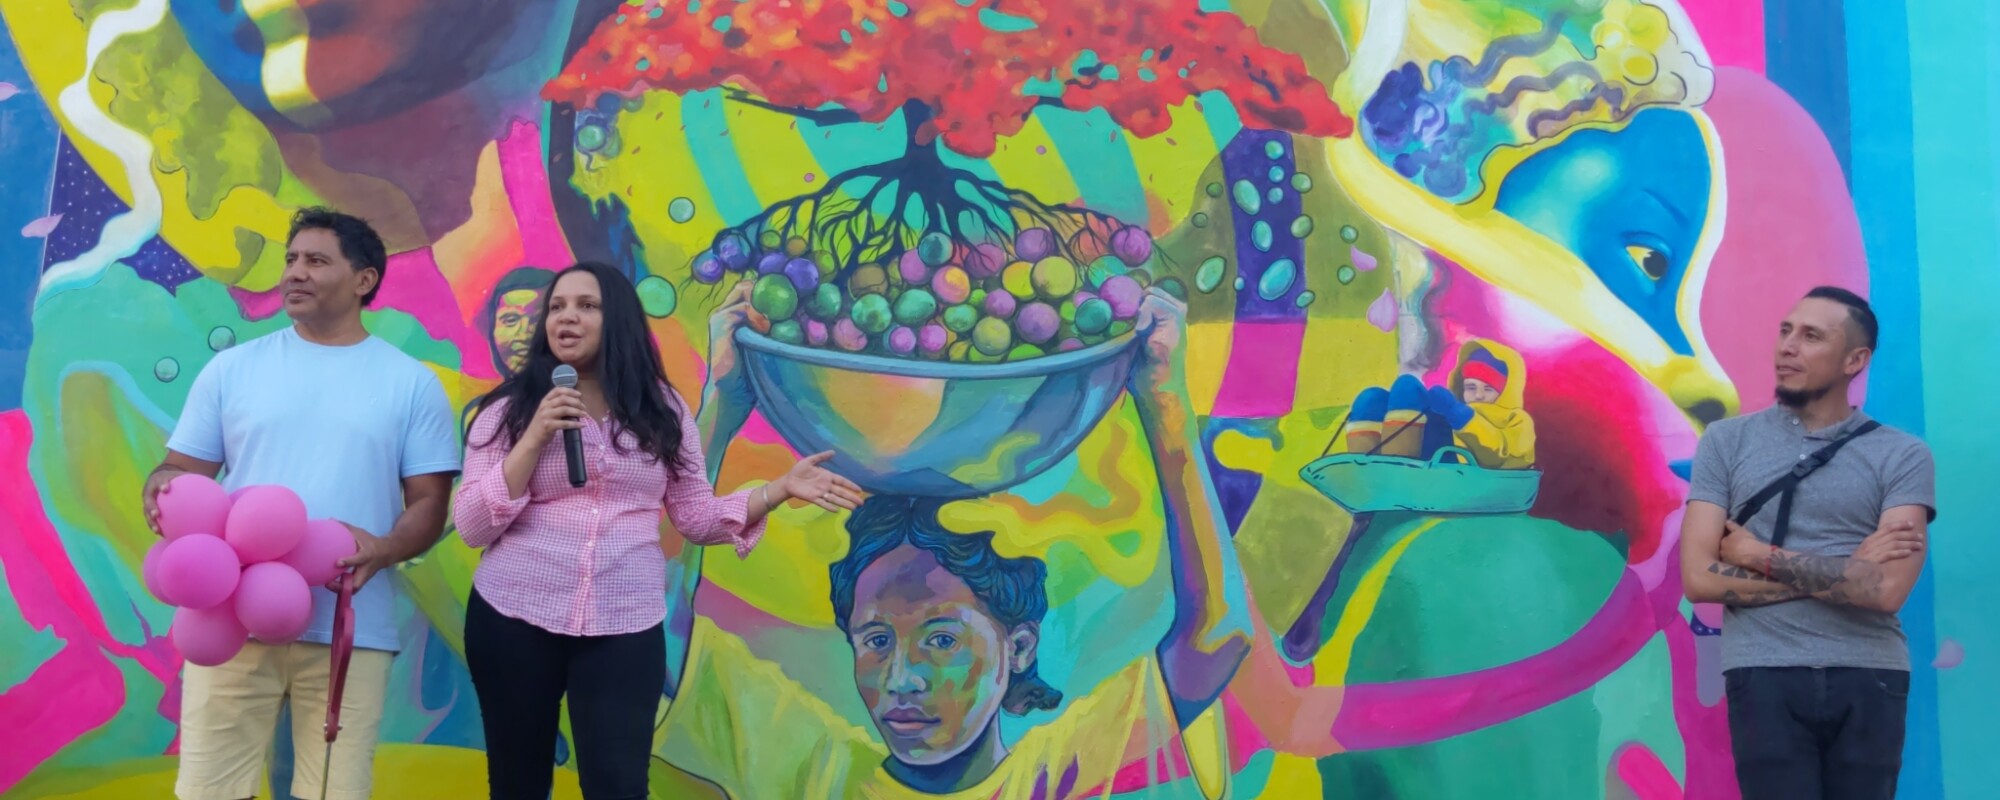 Two men and one woman stand in front of a brightly colored mural. The woman speaks into a microphone; to her right a man holds a cluster of balloons and a large pair of ceremonial scissors; the other man stands to her left.